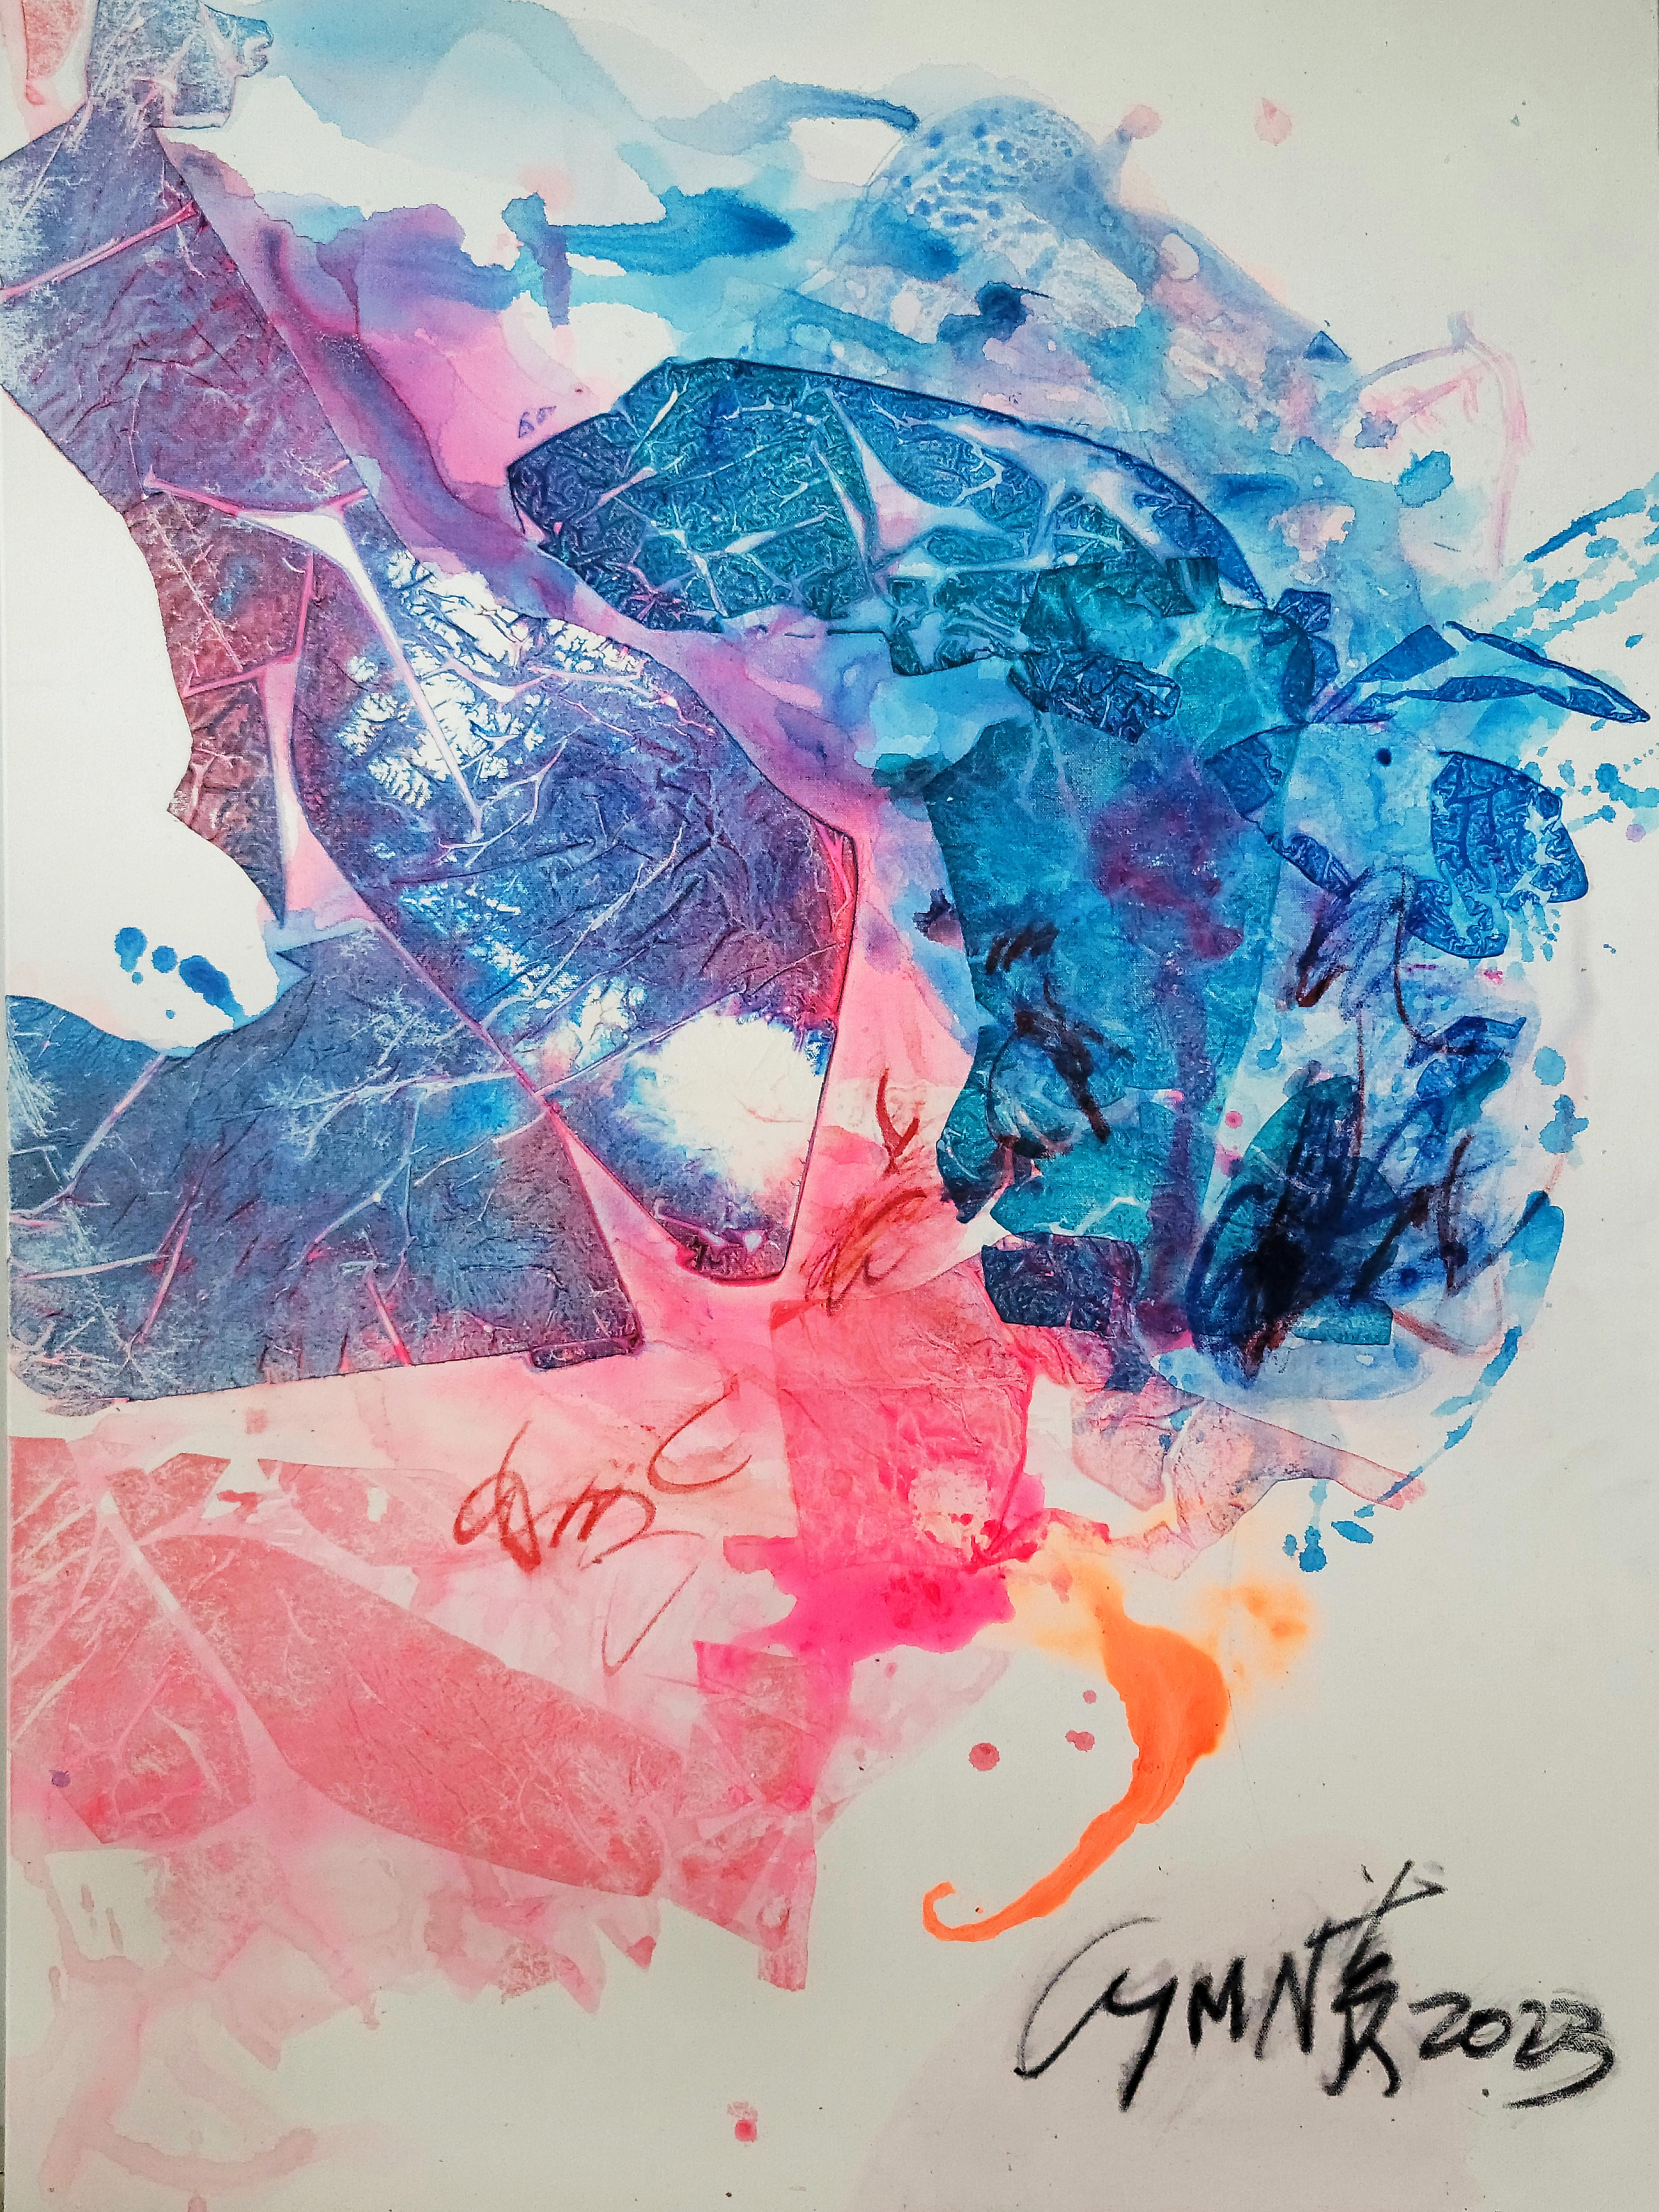 Resilient Resurgence-Fresh, colorful, Expressive Abstract, Zen Calligraphy - Painting by Cymn Wong 